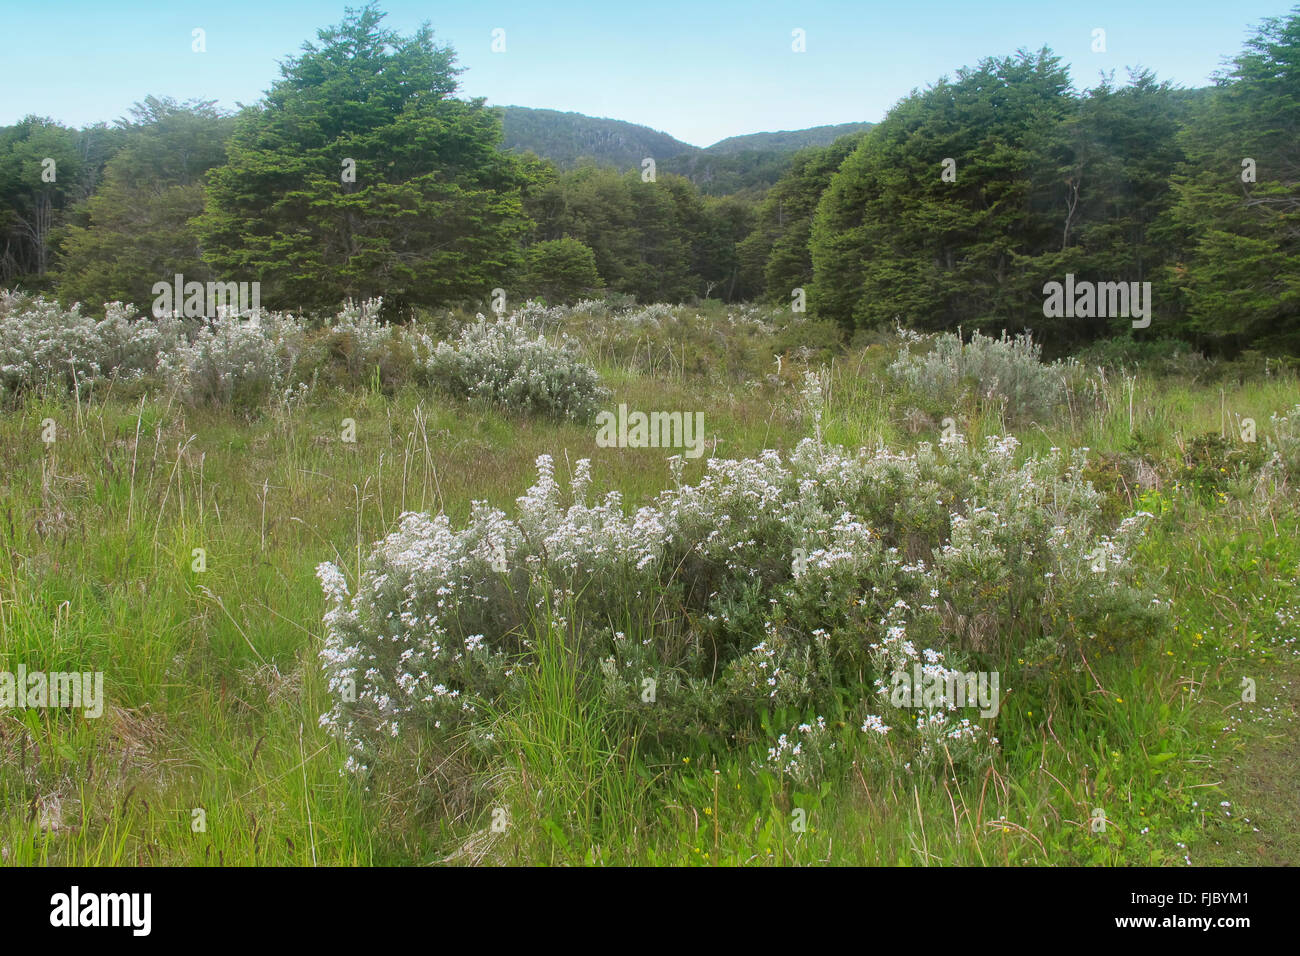 Patagonian landscape. Meadows with plants and trees. Argentina Stock Photo